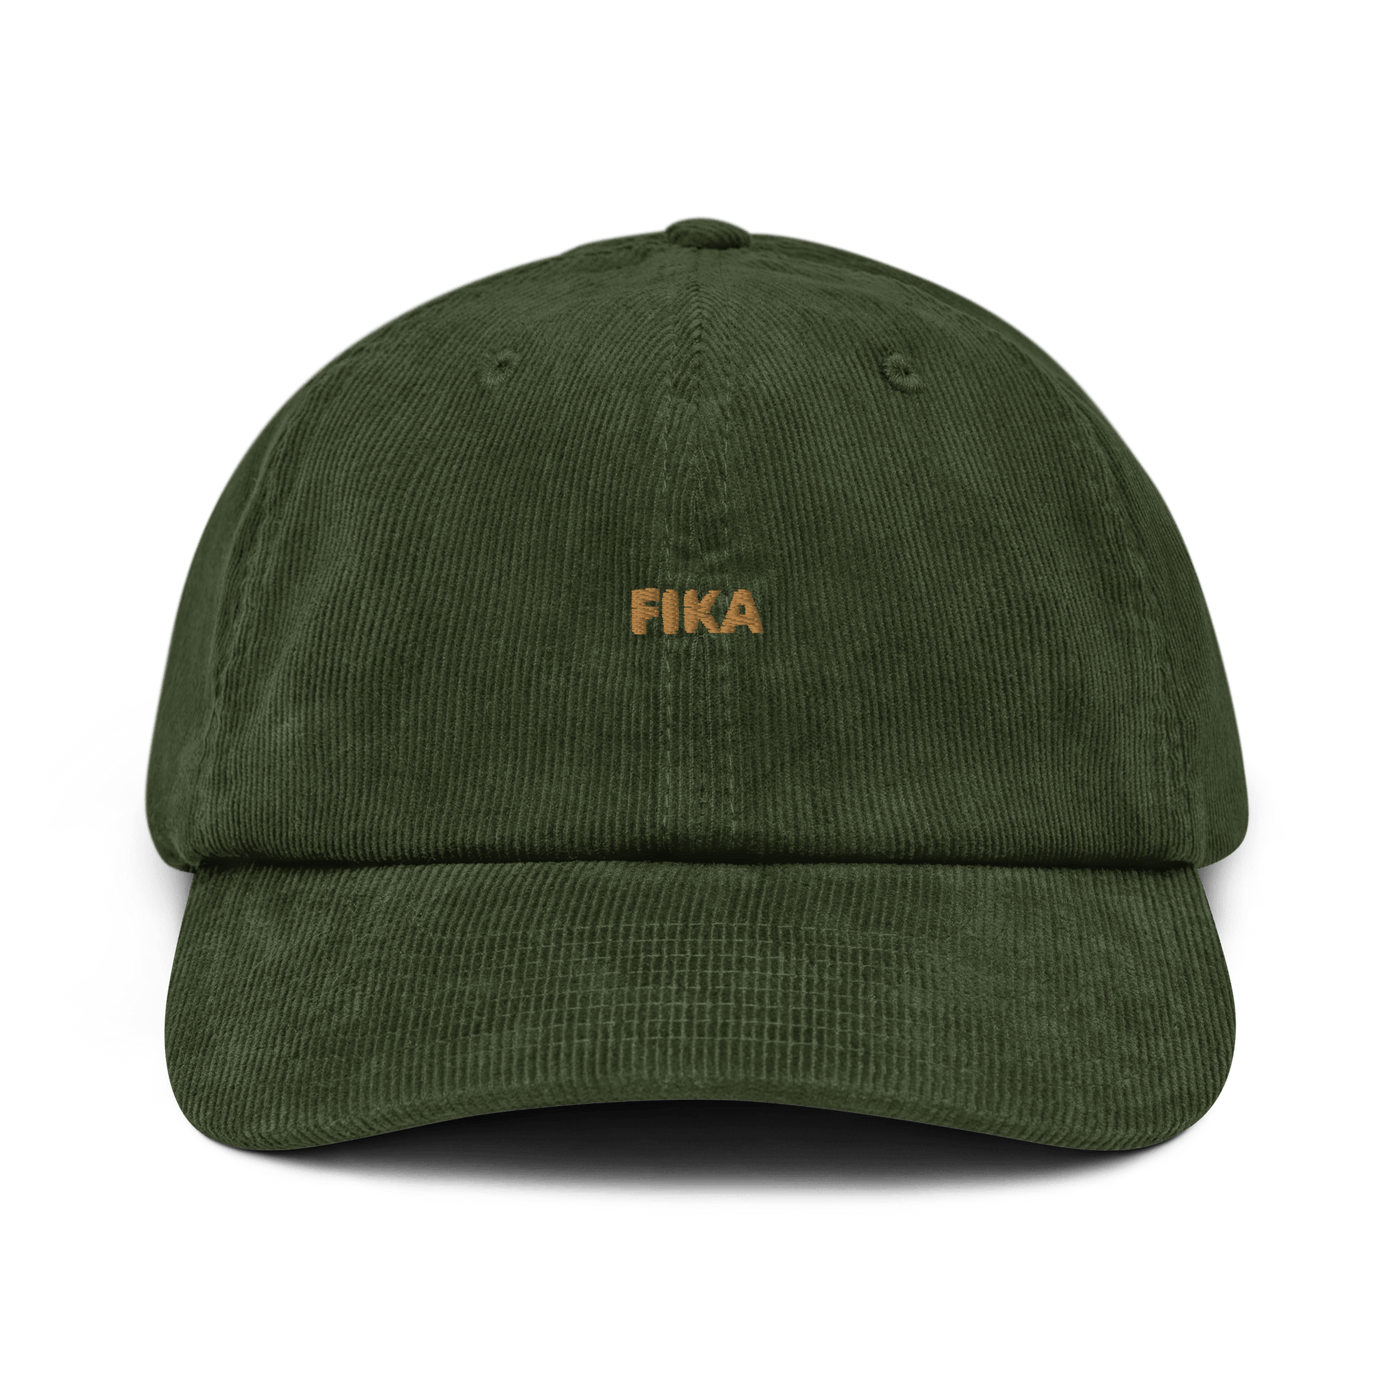 FIKA Corduroy hat - Oxford Navy - - Just Another Cap Store